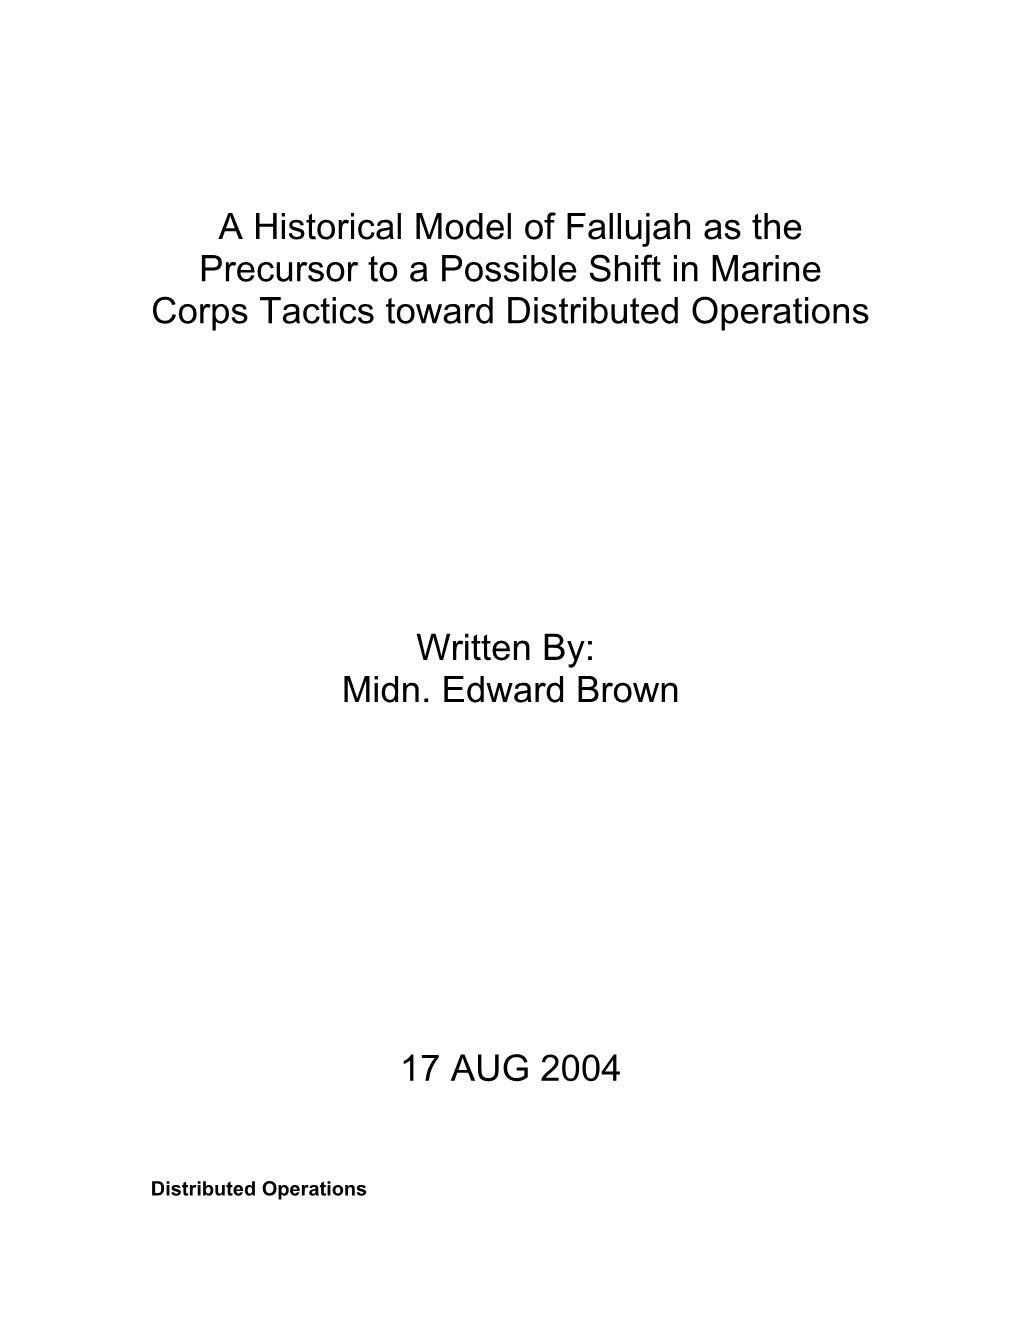 A Historical Model of Fallujah As the Precursor to a Possible Shift in Marine Corps Tactics